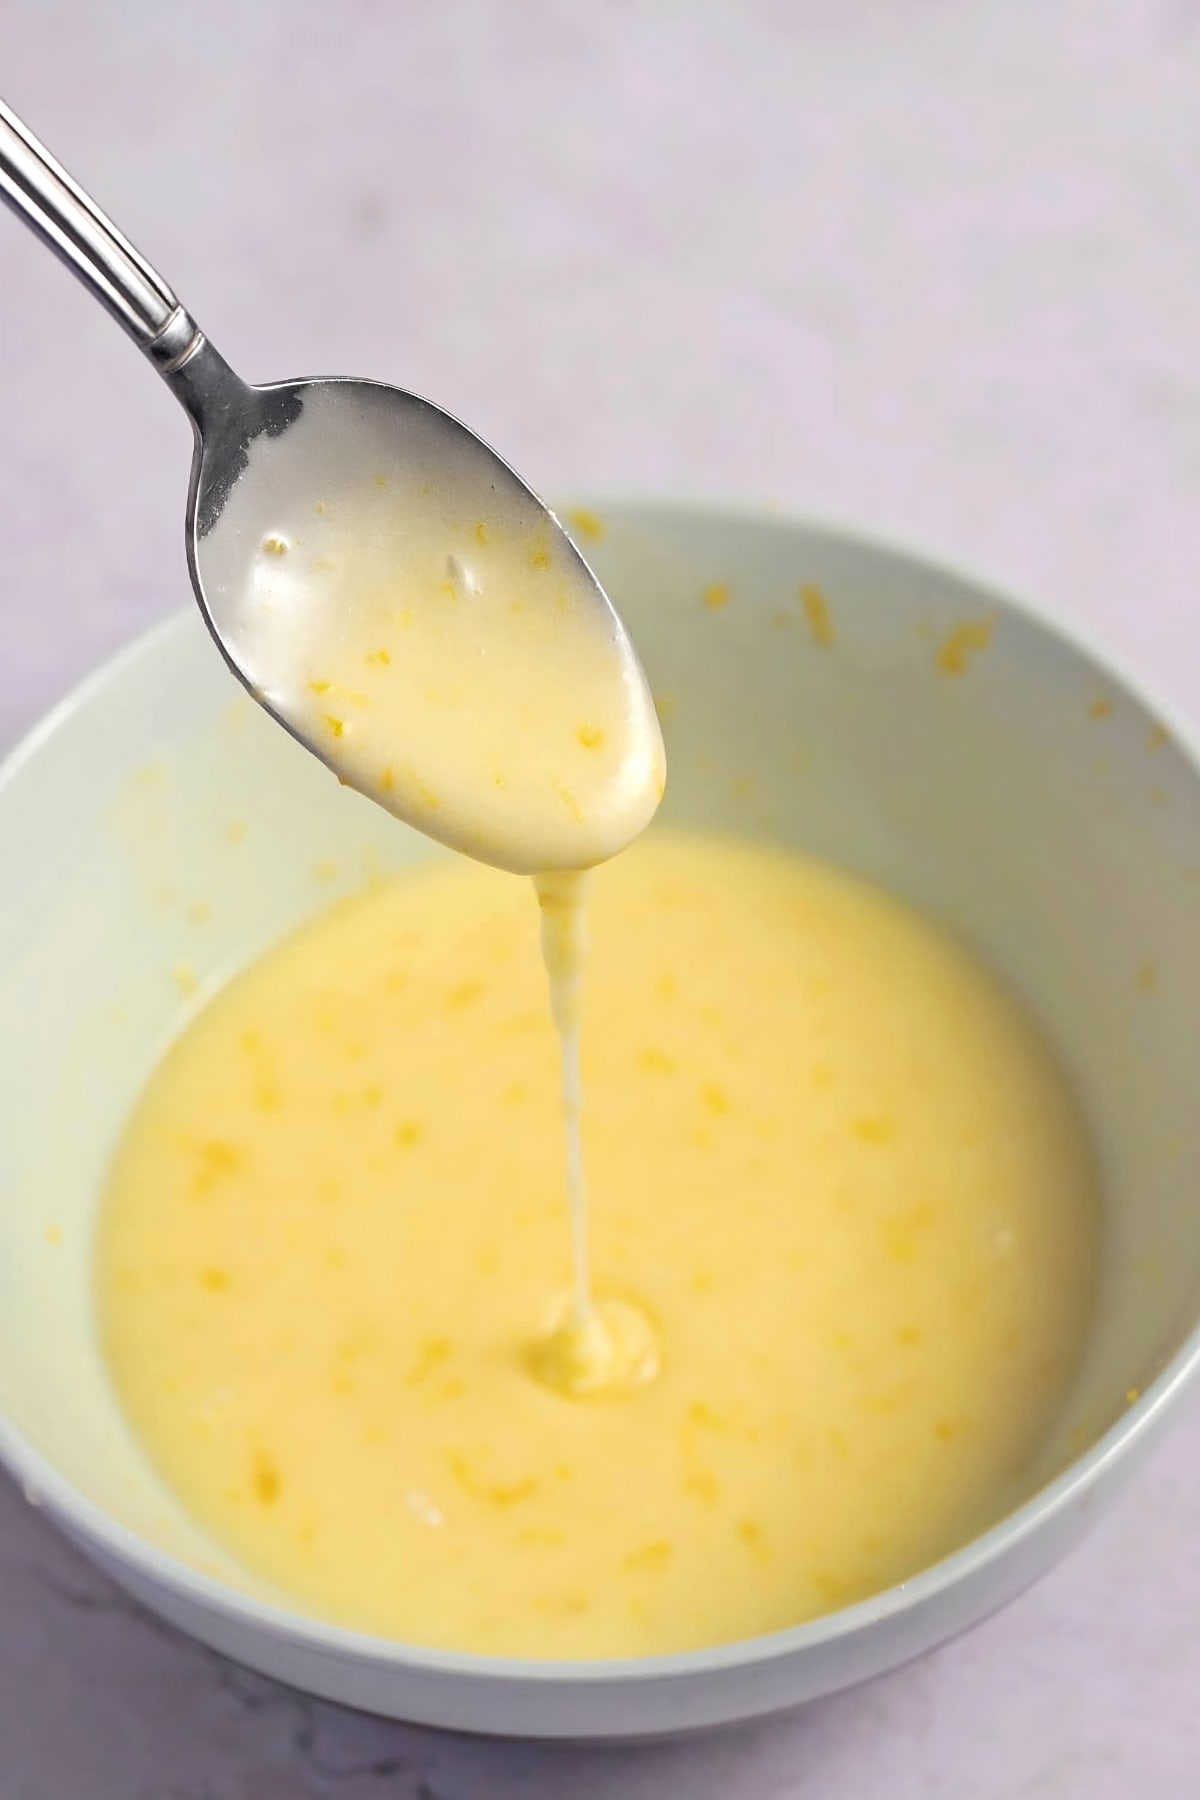 Orange Glaze Icing Dripping From a Spoon into a White Bowl